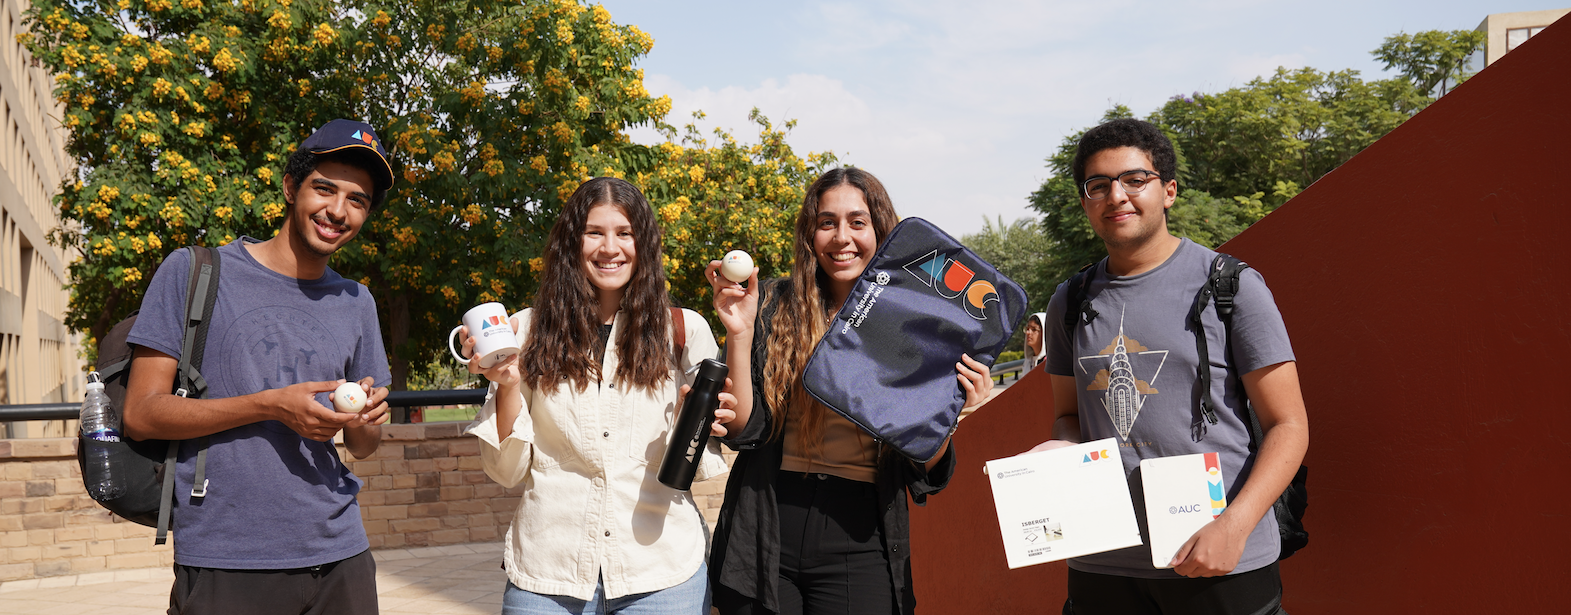 Students with merchandise